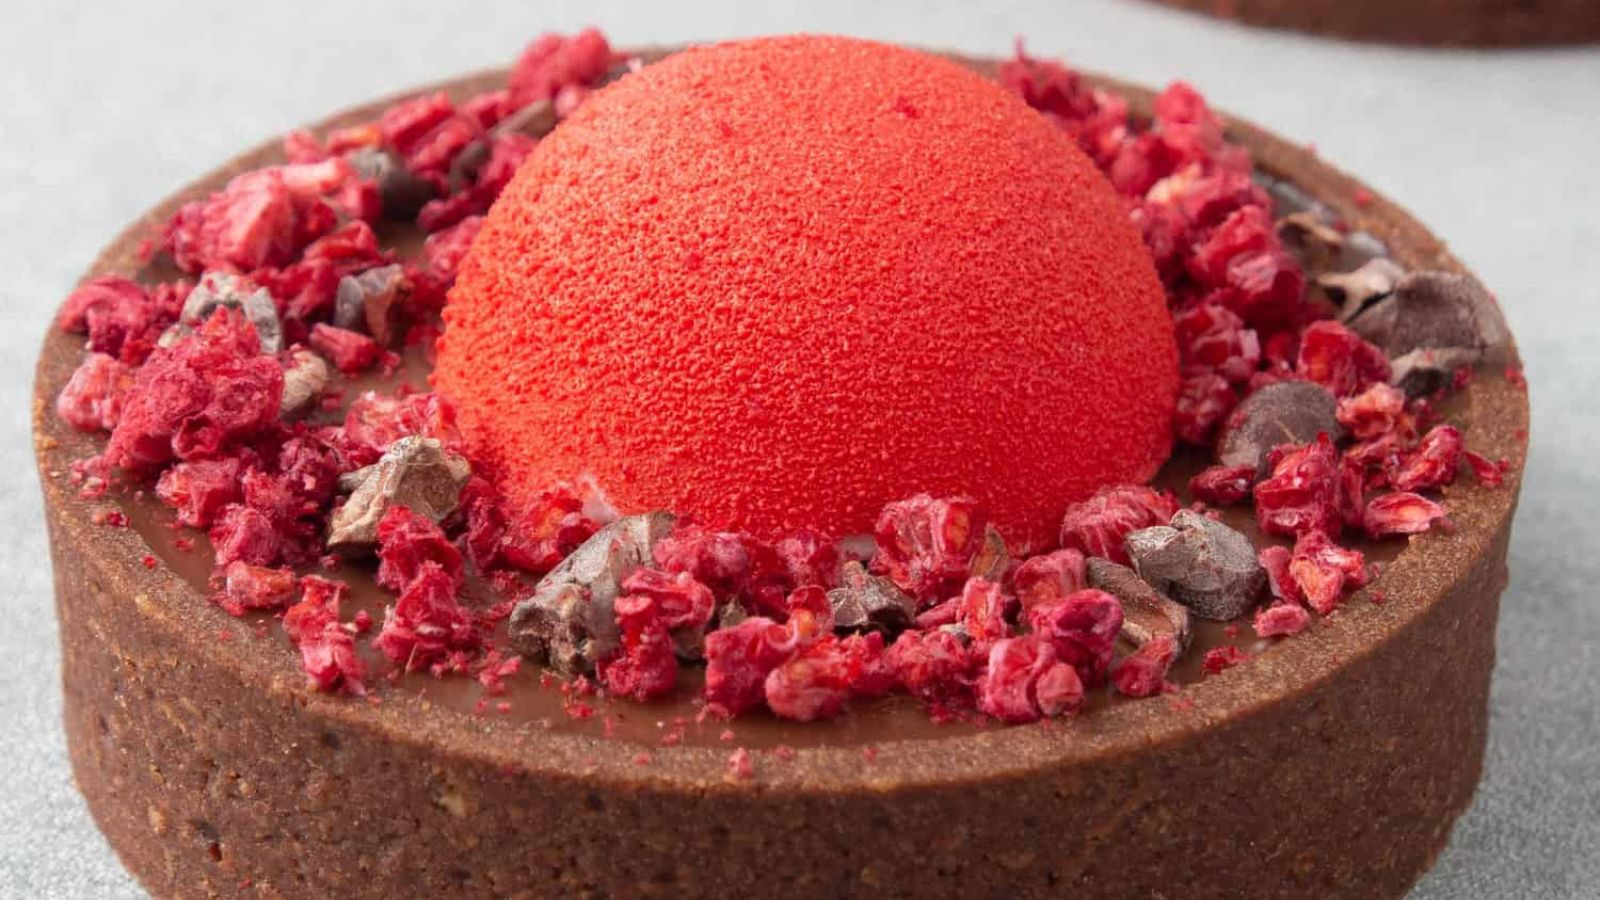 Tropical Temptations: 18 Exotic Summer Dessert Recipes to Brighten Your Week